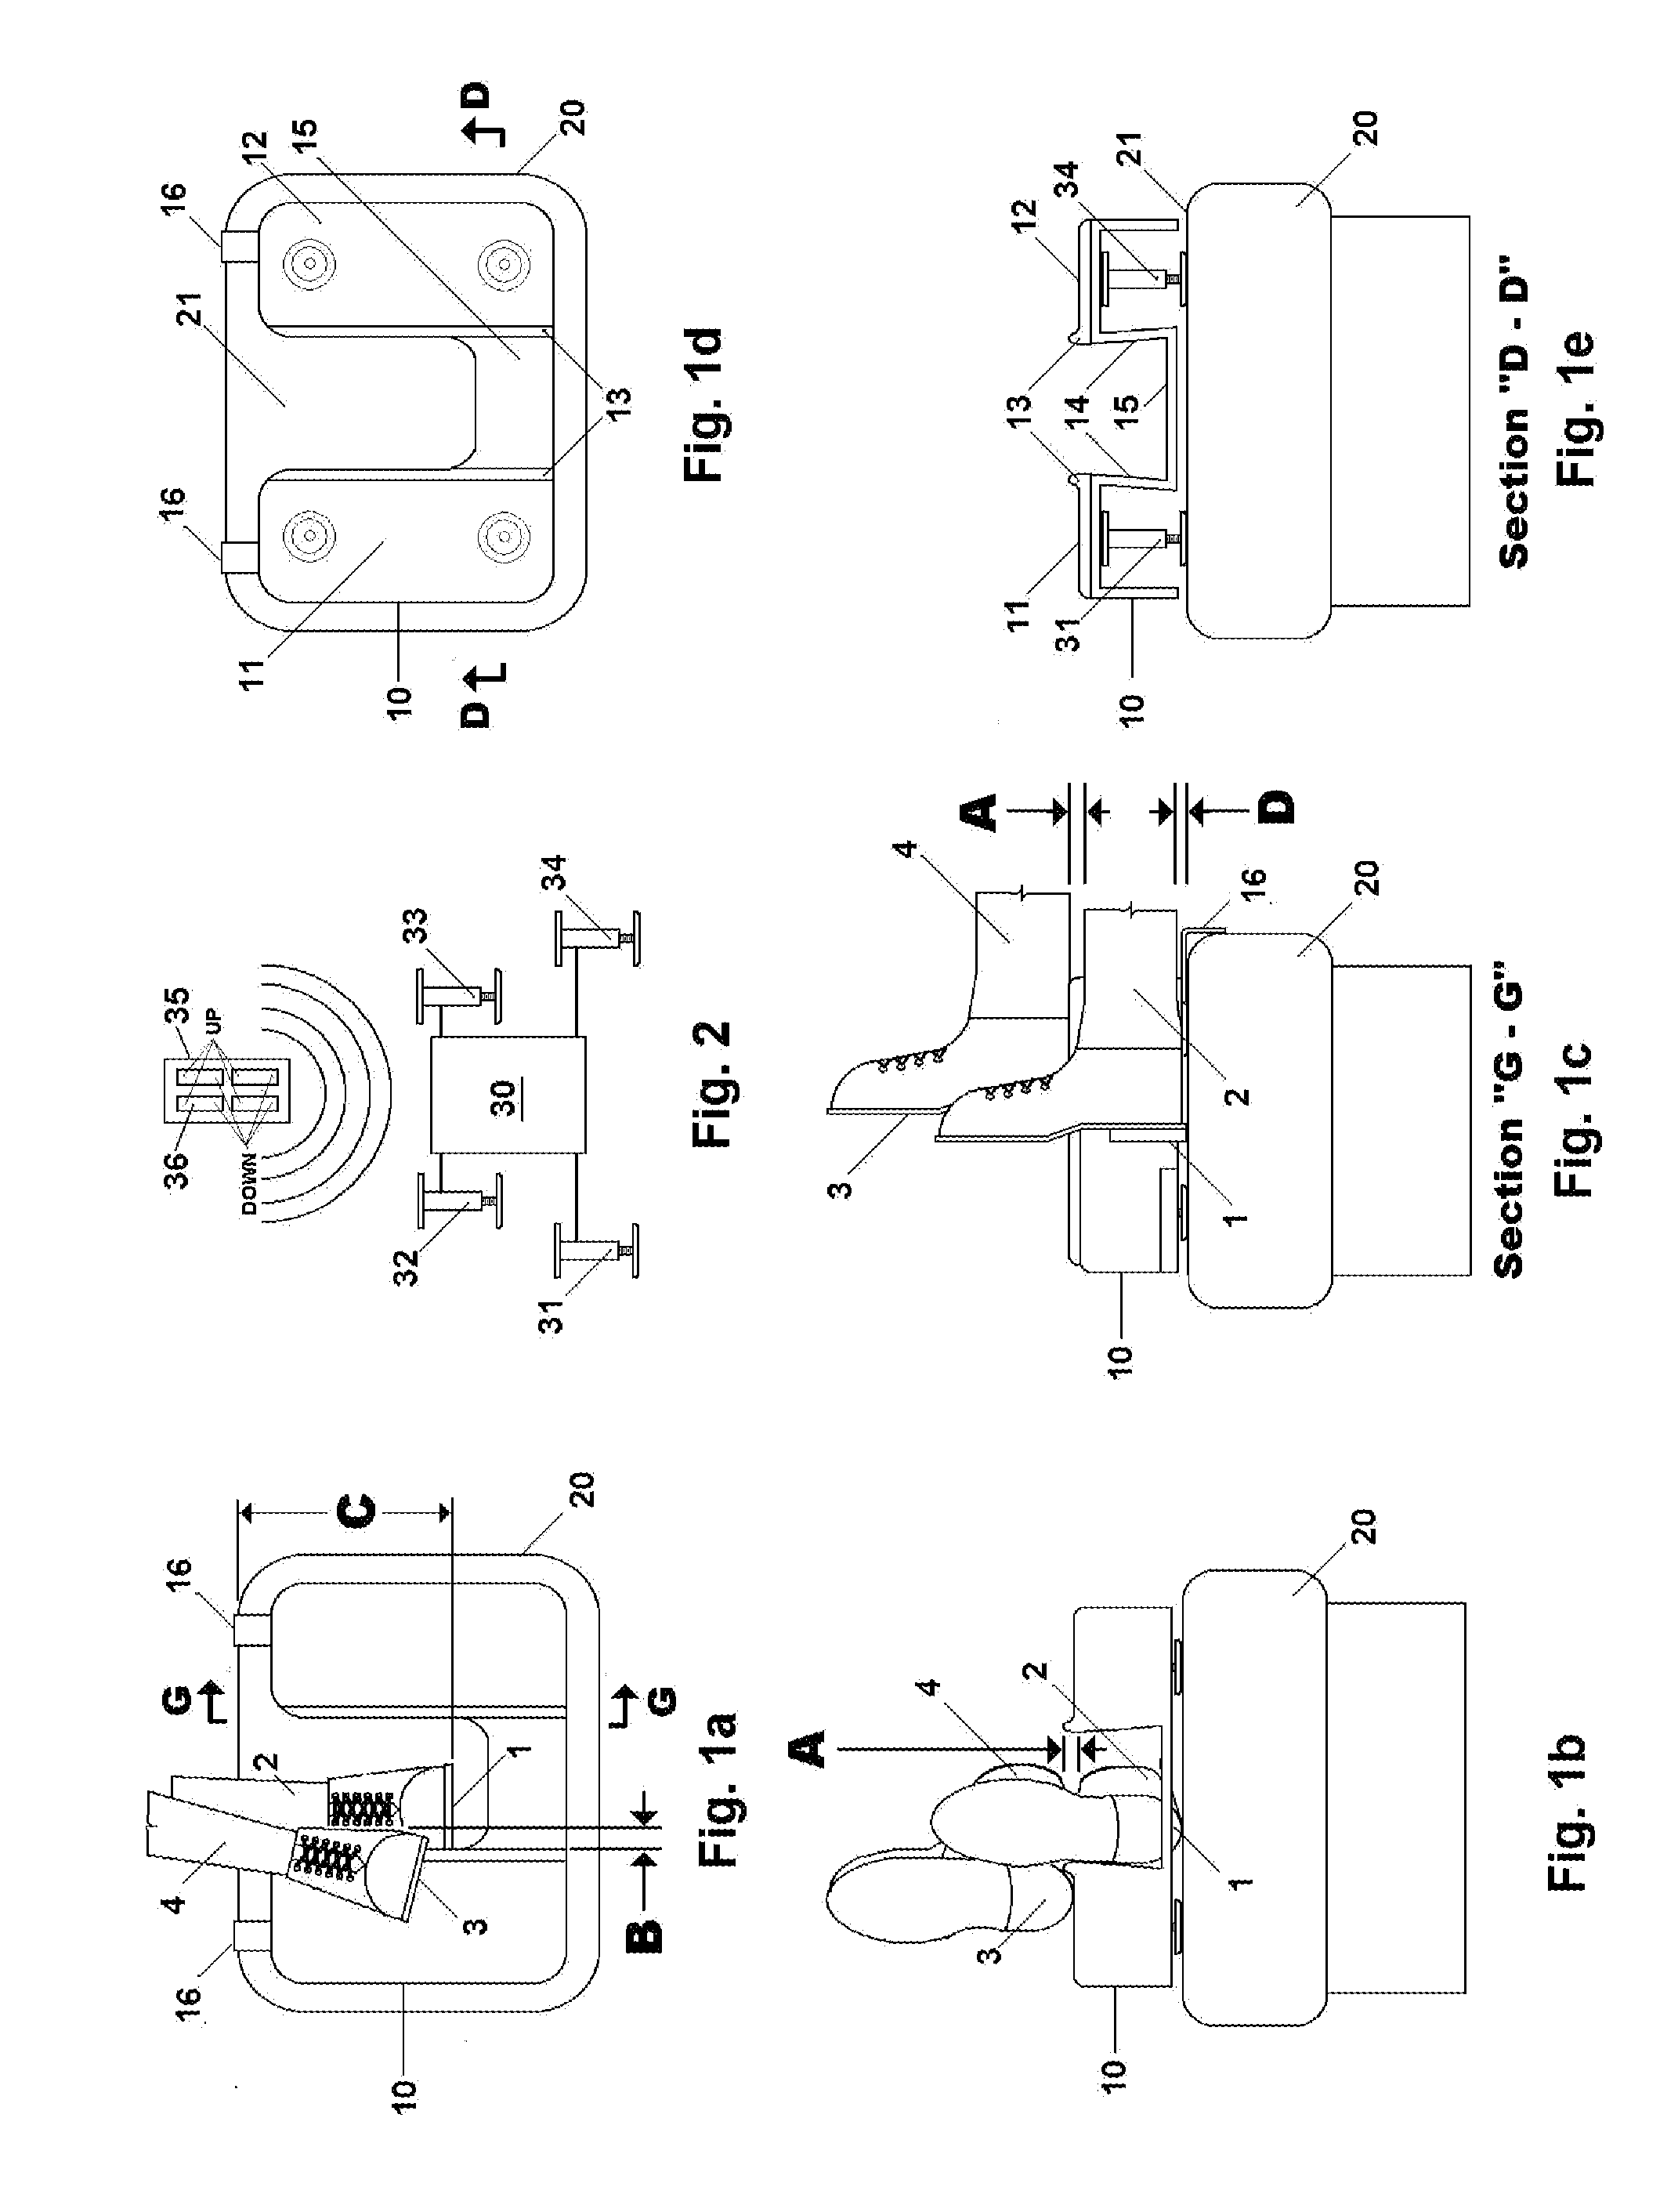 Heel support device for circulation improvement